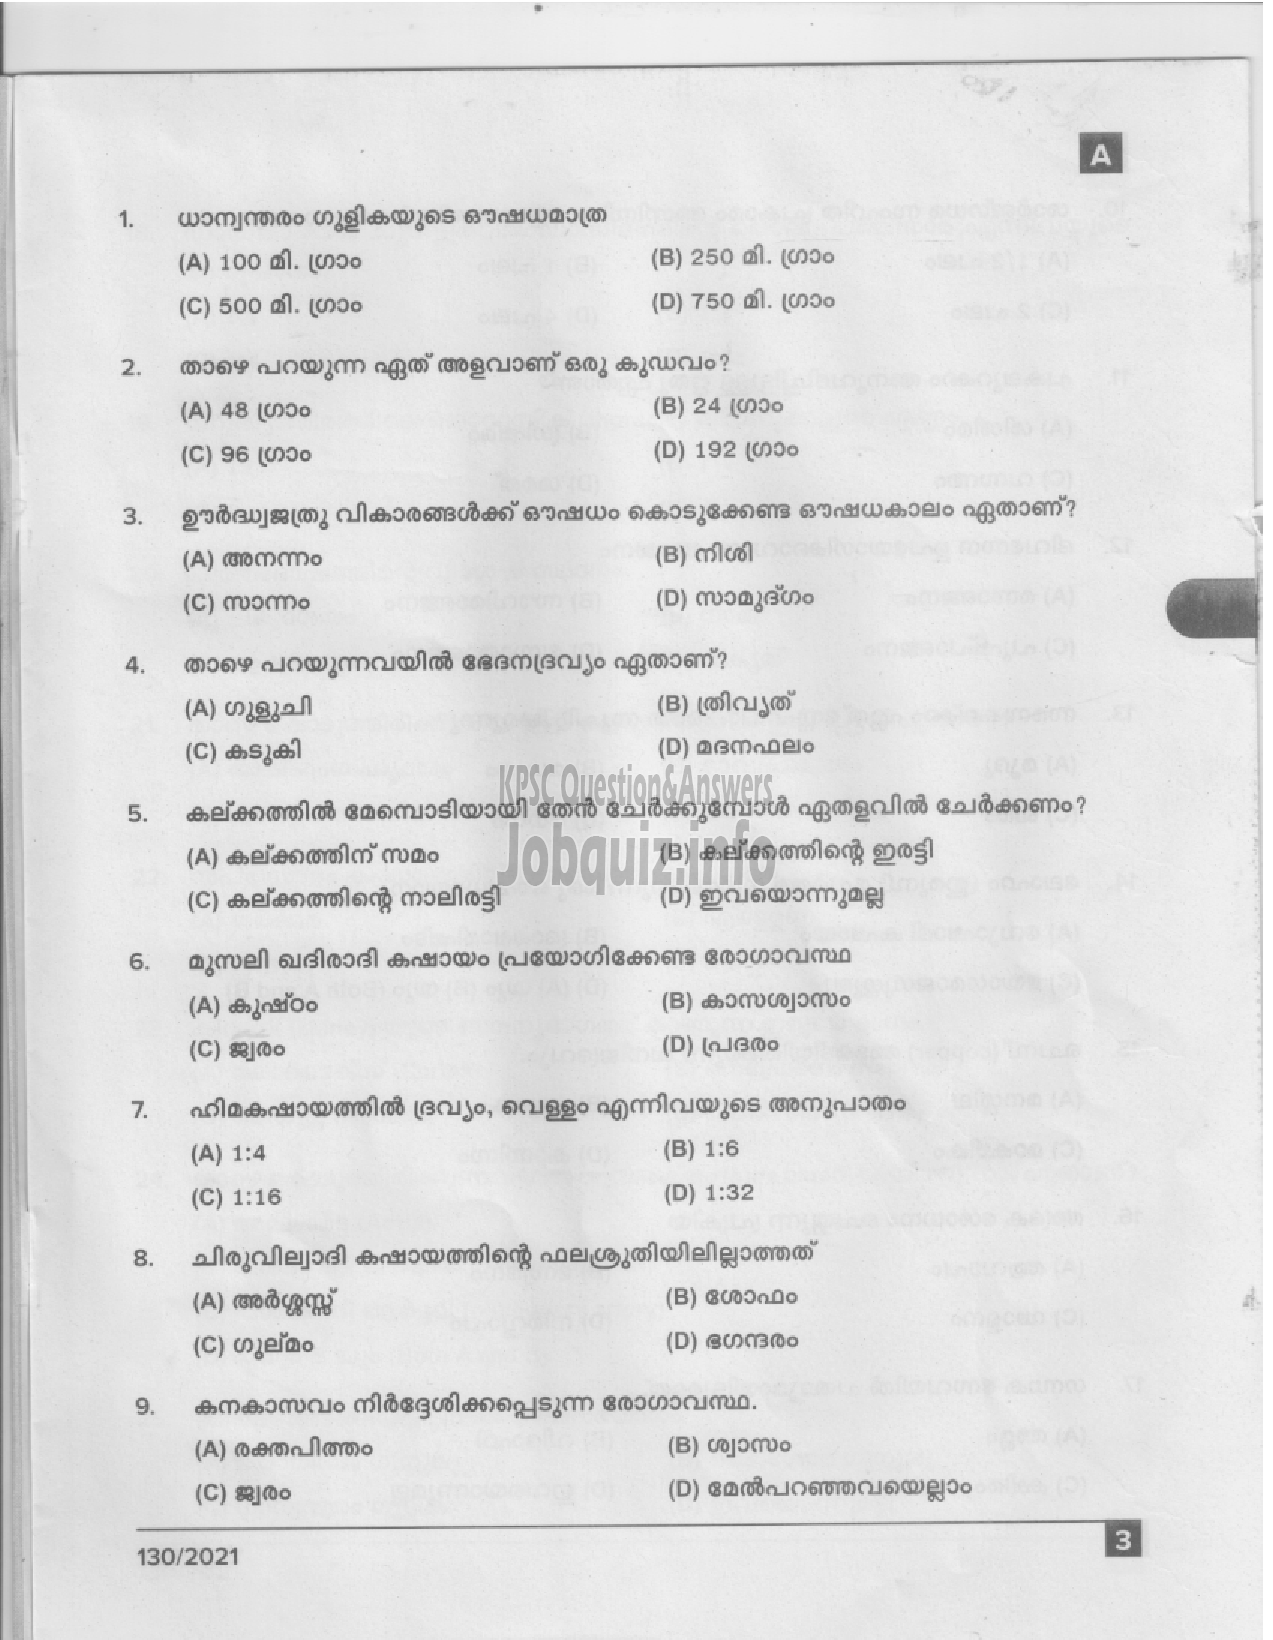 Kerala PSC Question Paper - Pharmacist Gr II (Ayurveda) - ISM/ IMS/ Ayurveda Colleges-1